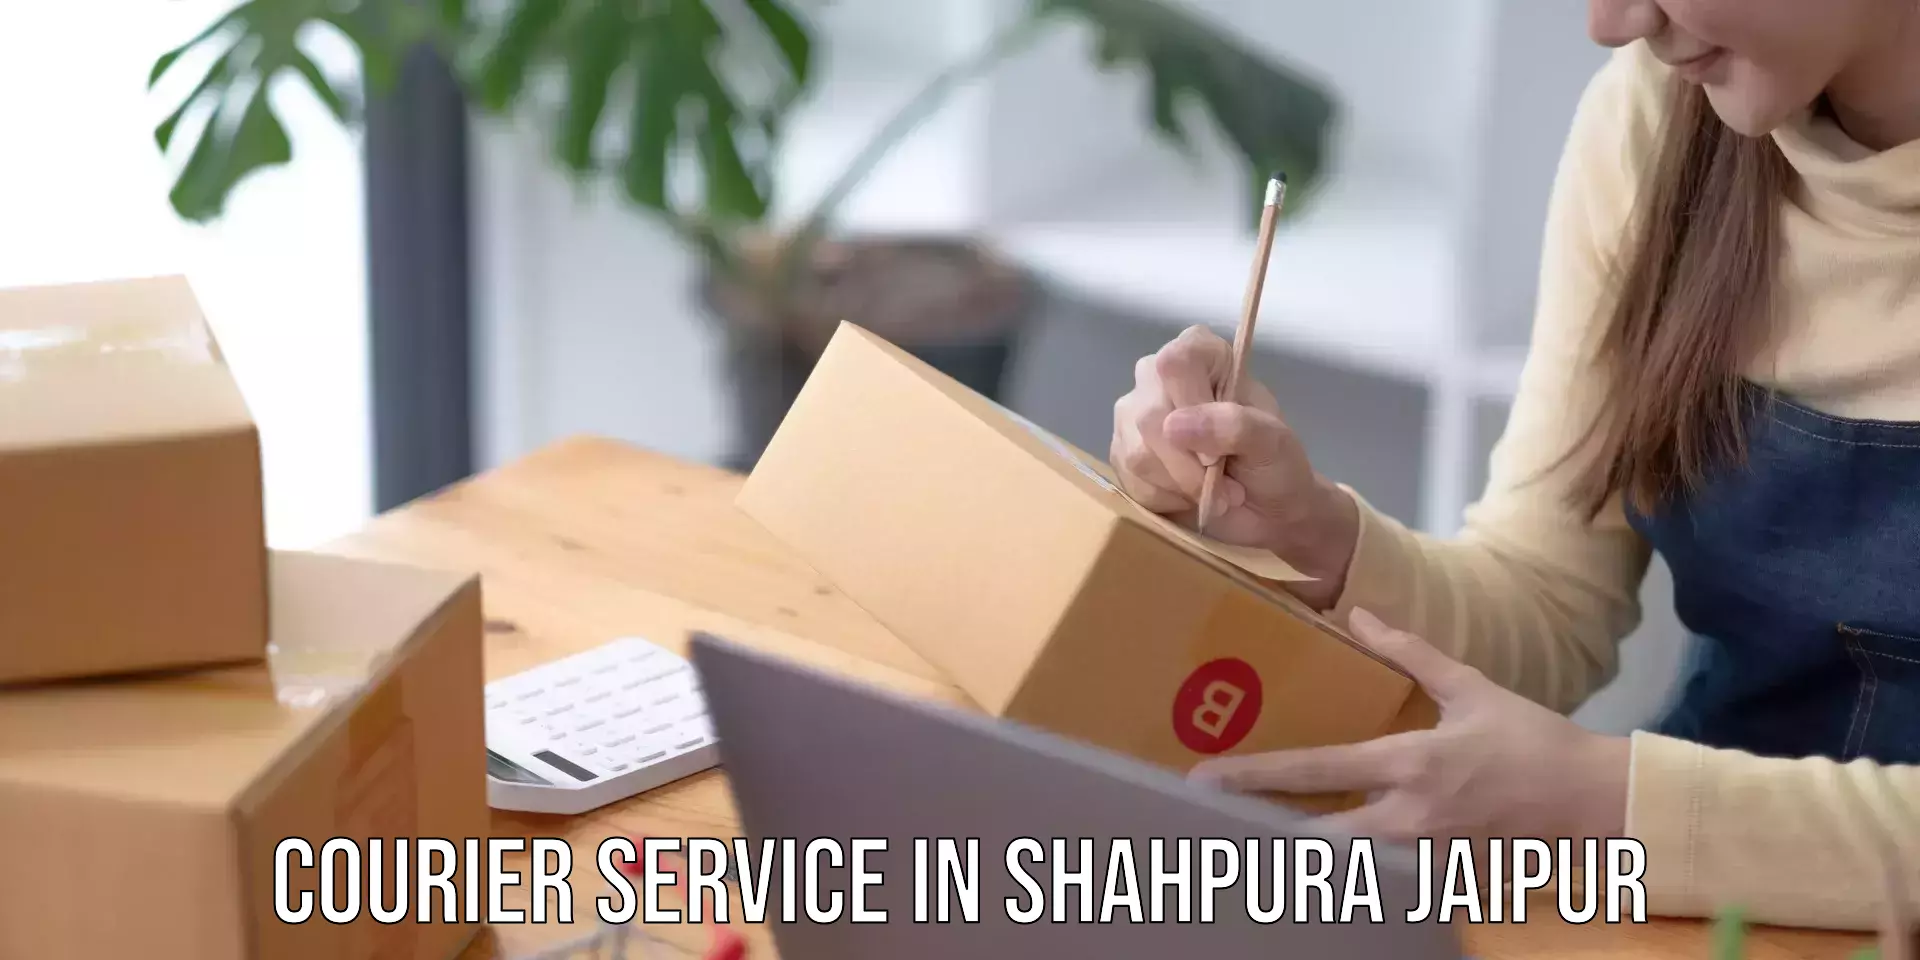 On-time delivery services in Shahpura Jaipur